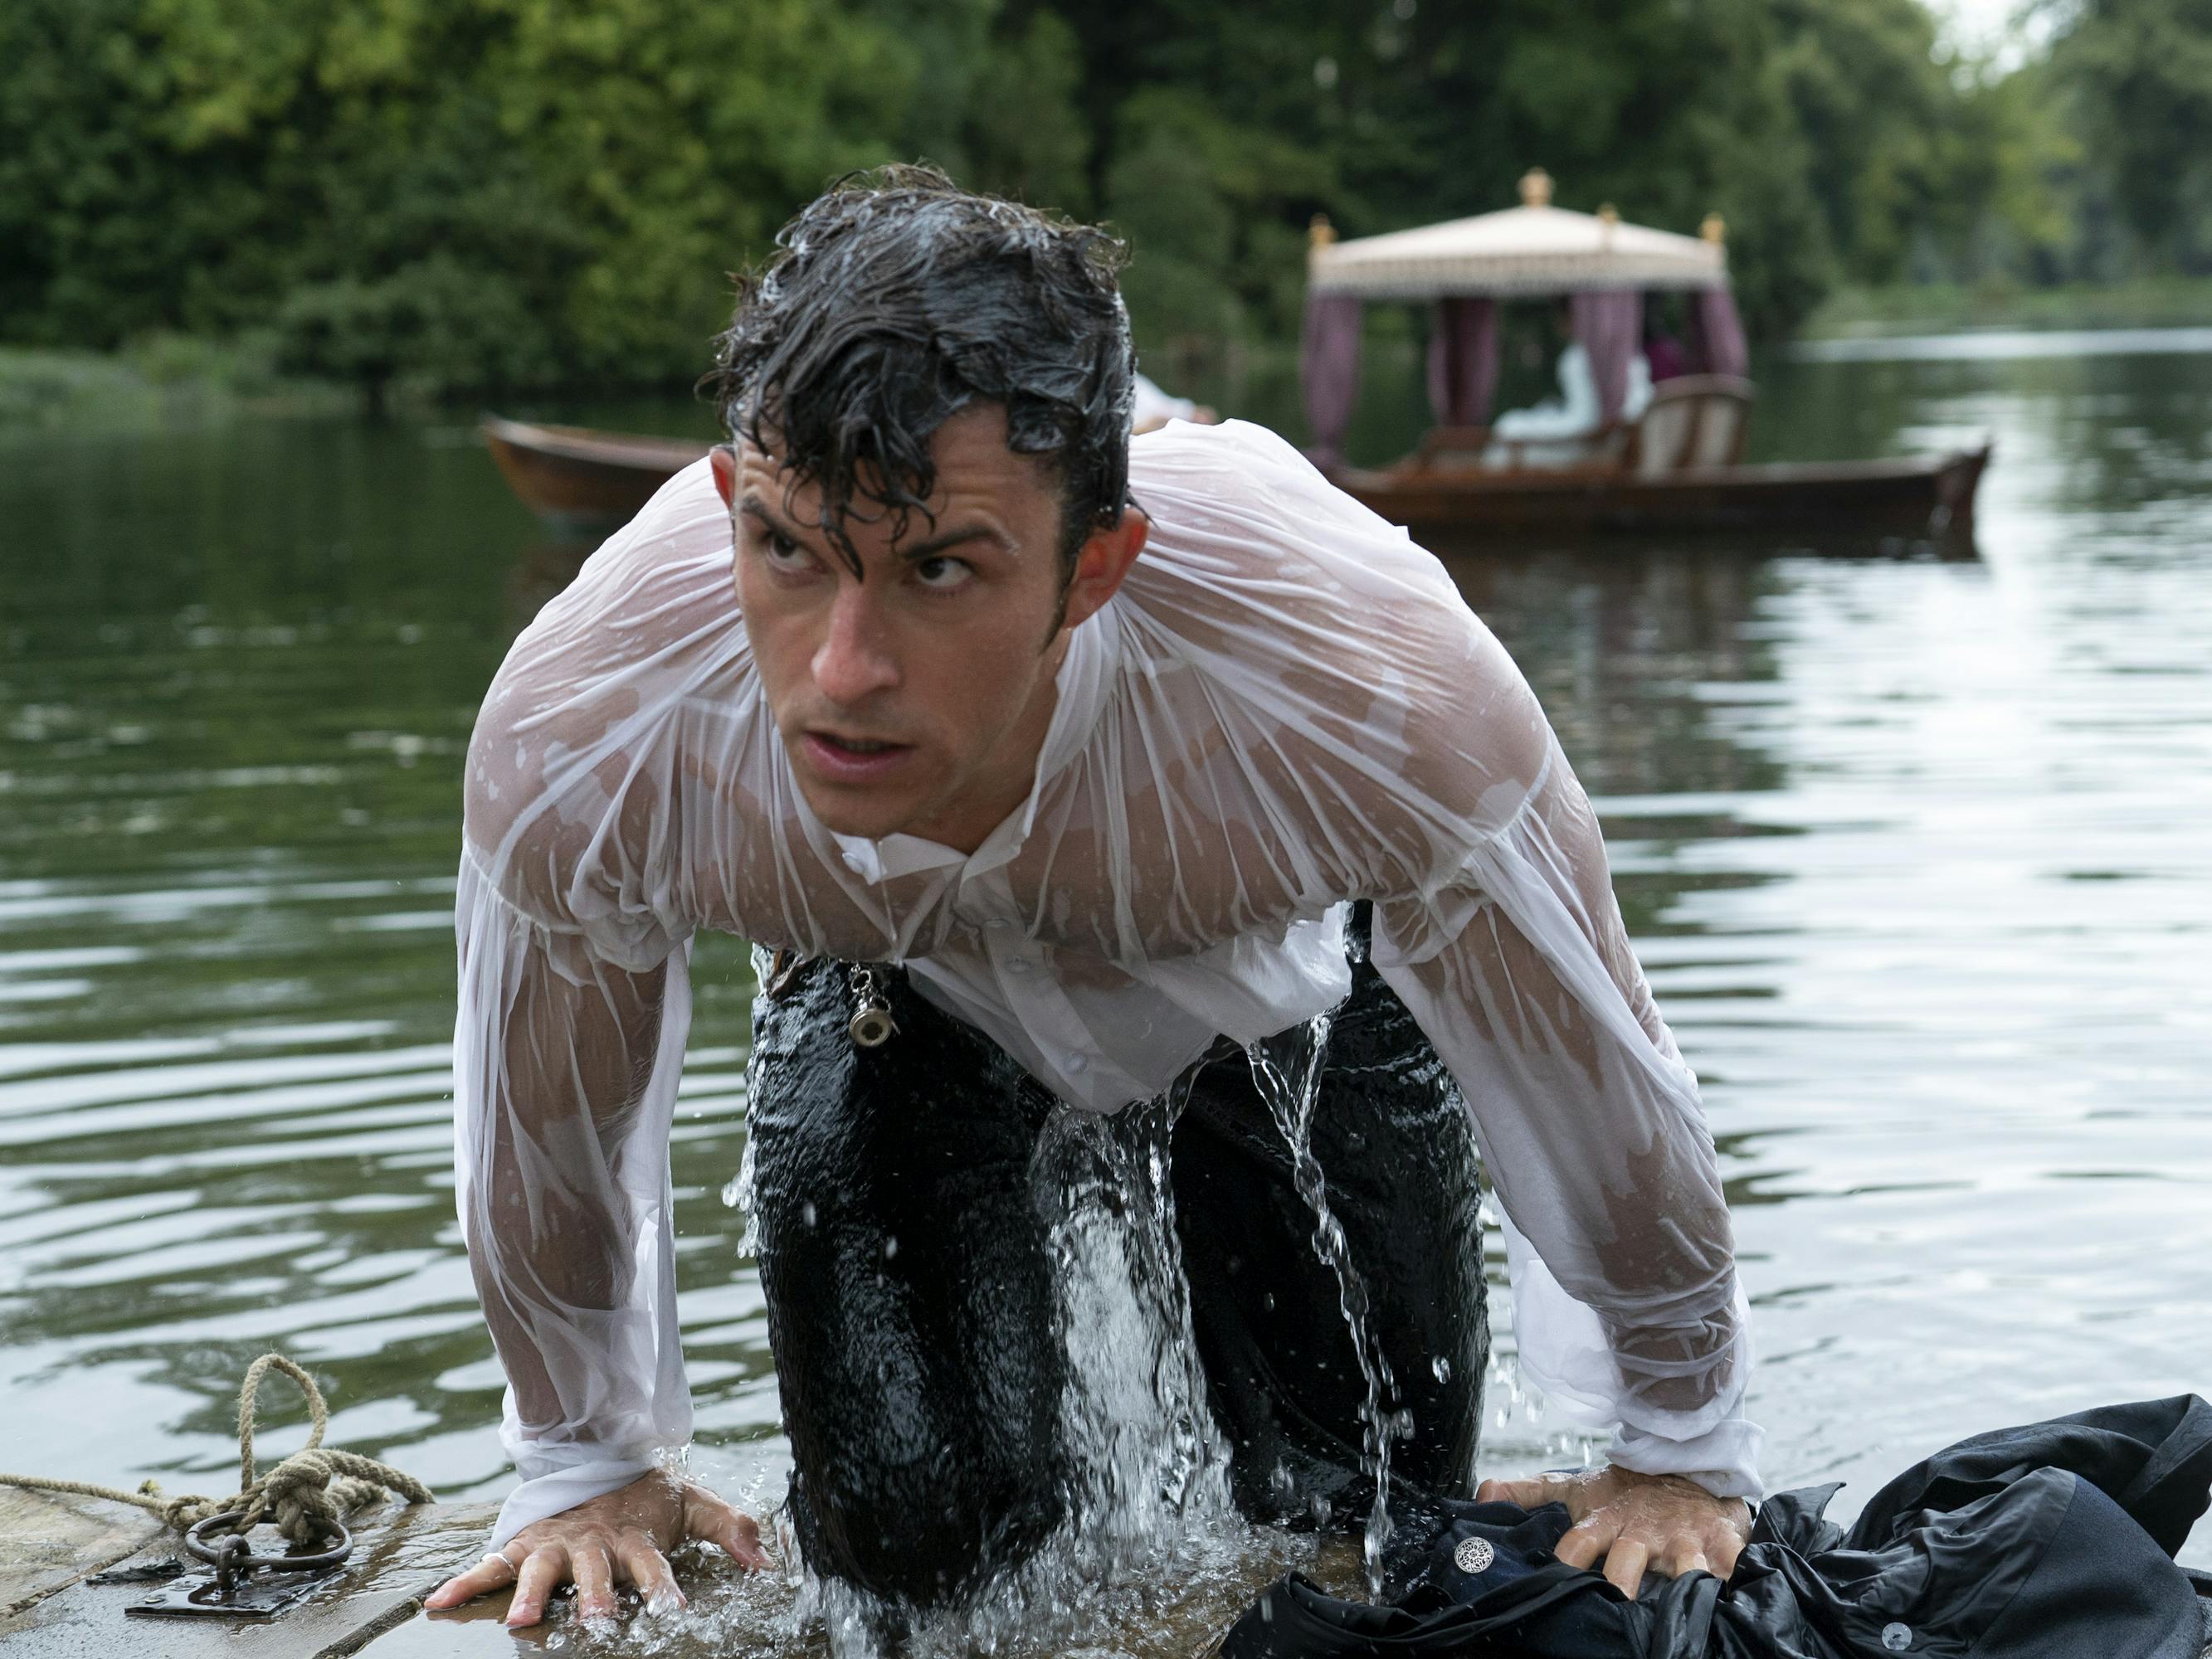 Anthony Bridgerton (Jonathan Bailey) wears a white shirt and dark pants, and has just fallen in the pond. SWOON!